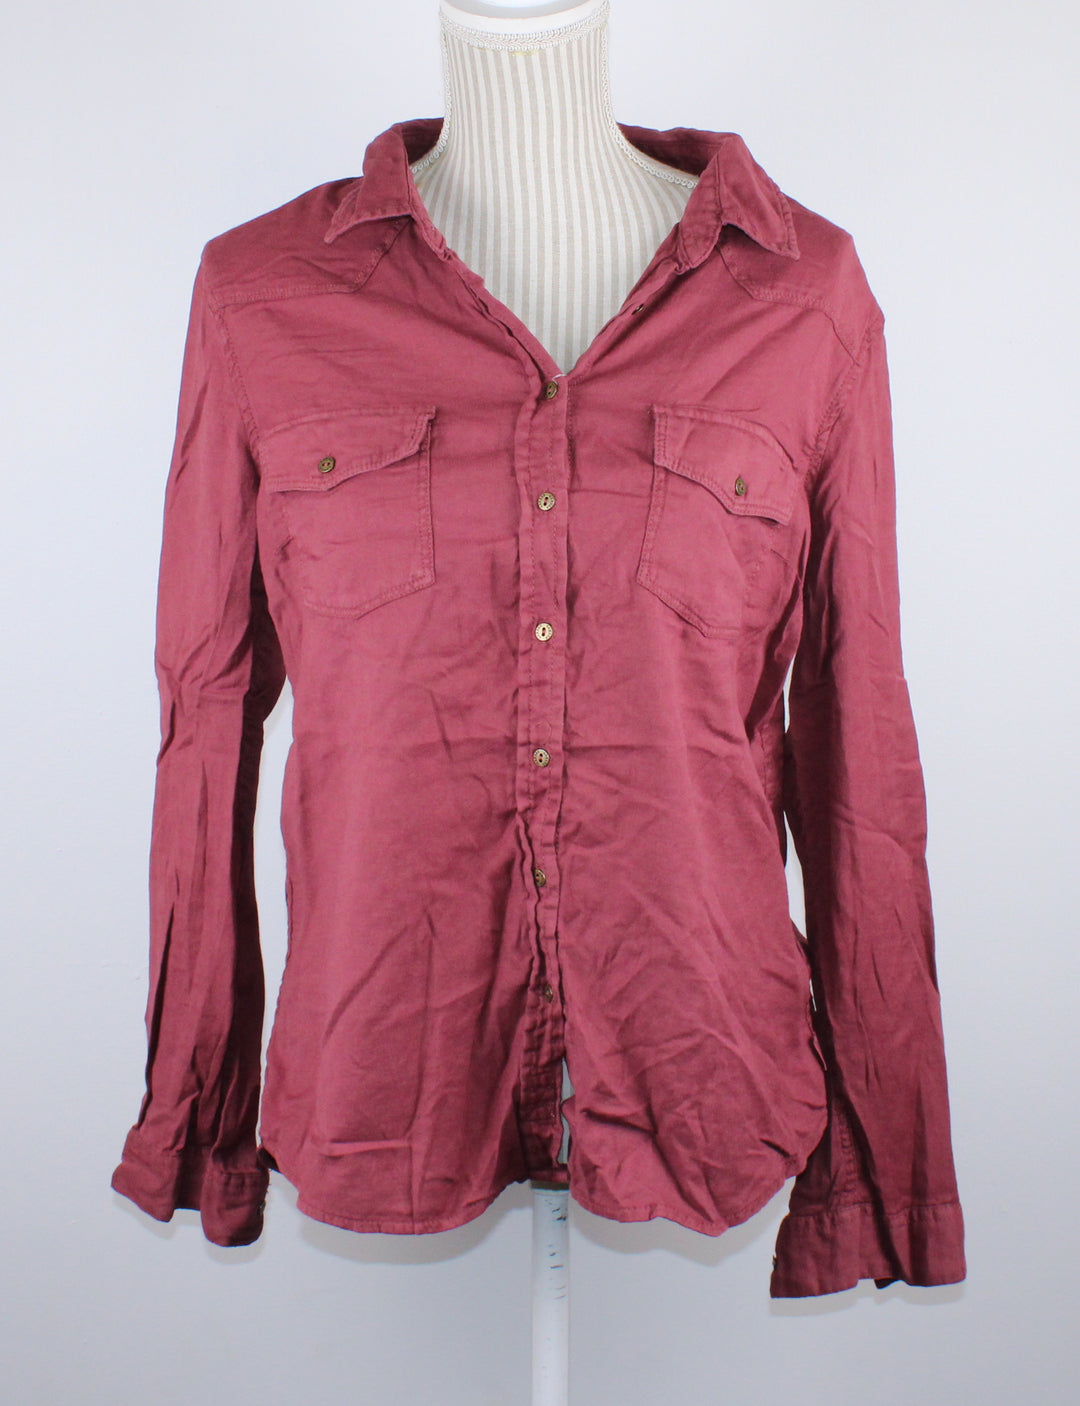 GARAGE CLASSIC FIT BURGUNDY RELAXED FIT TOP LADIES LARGE VGUC